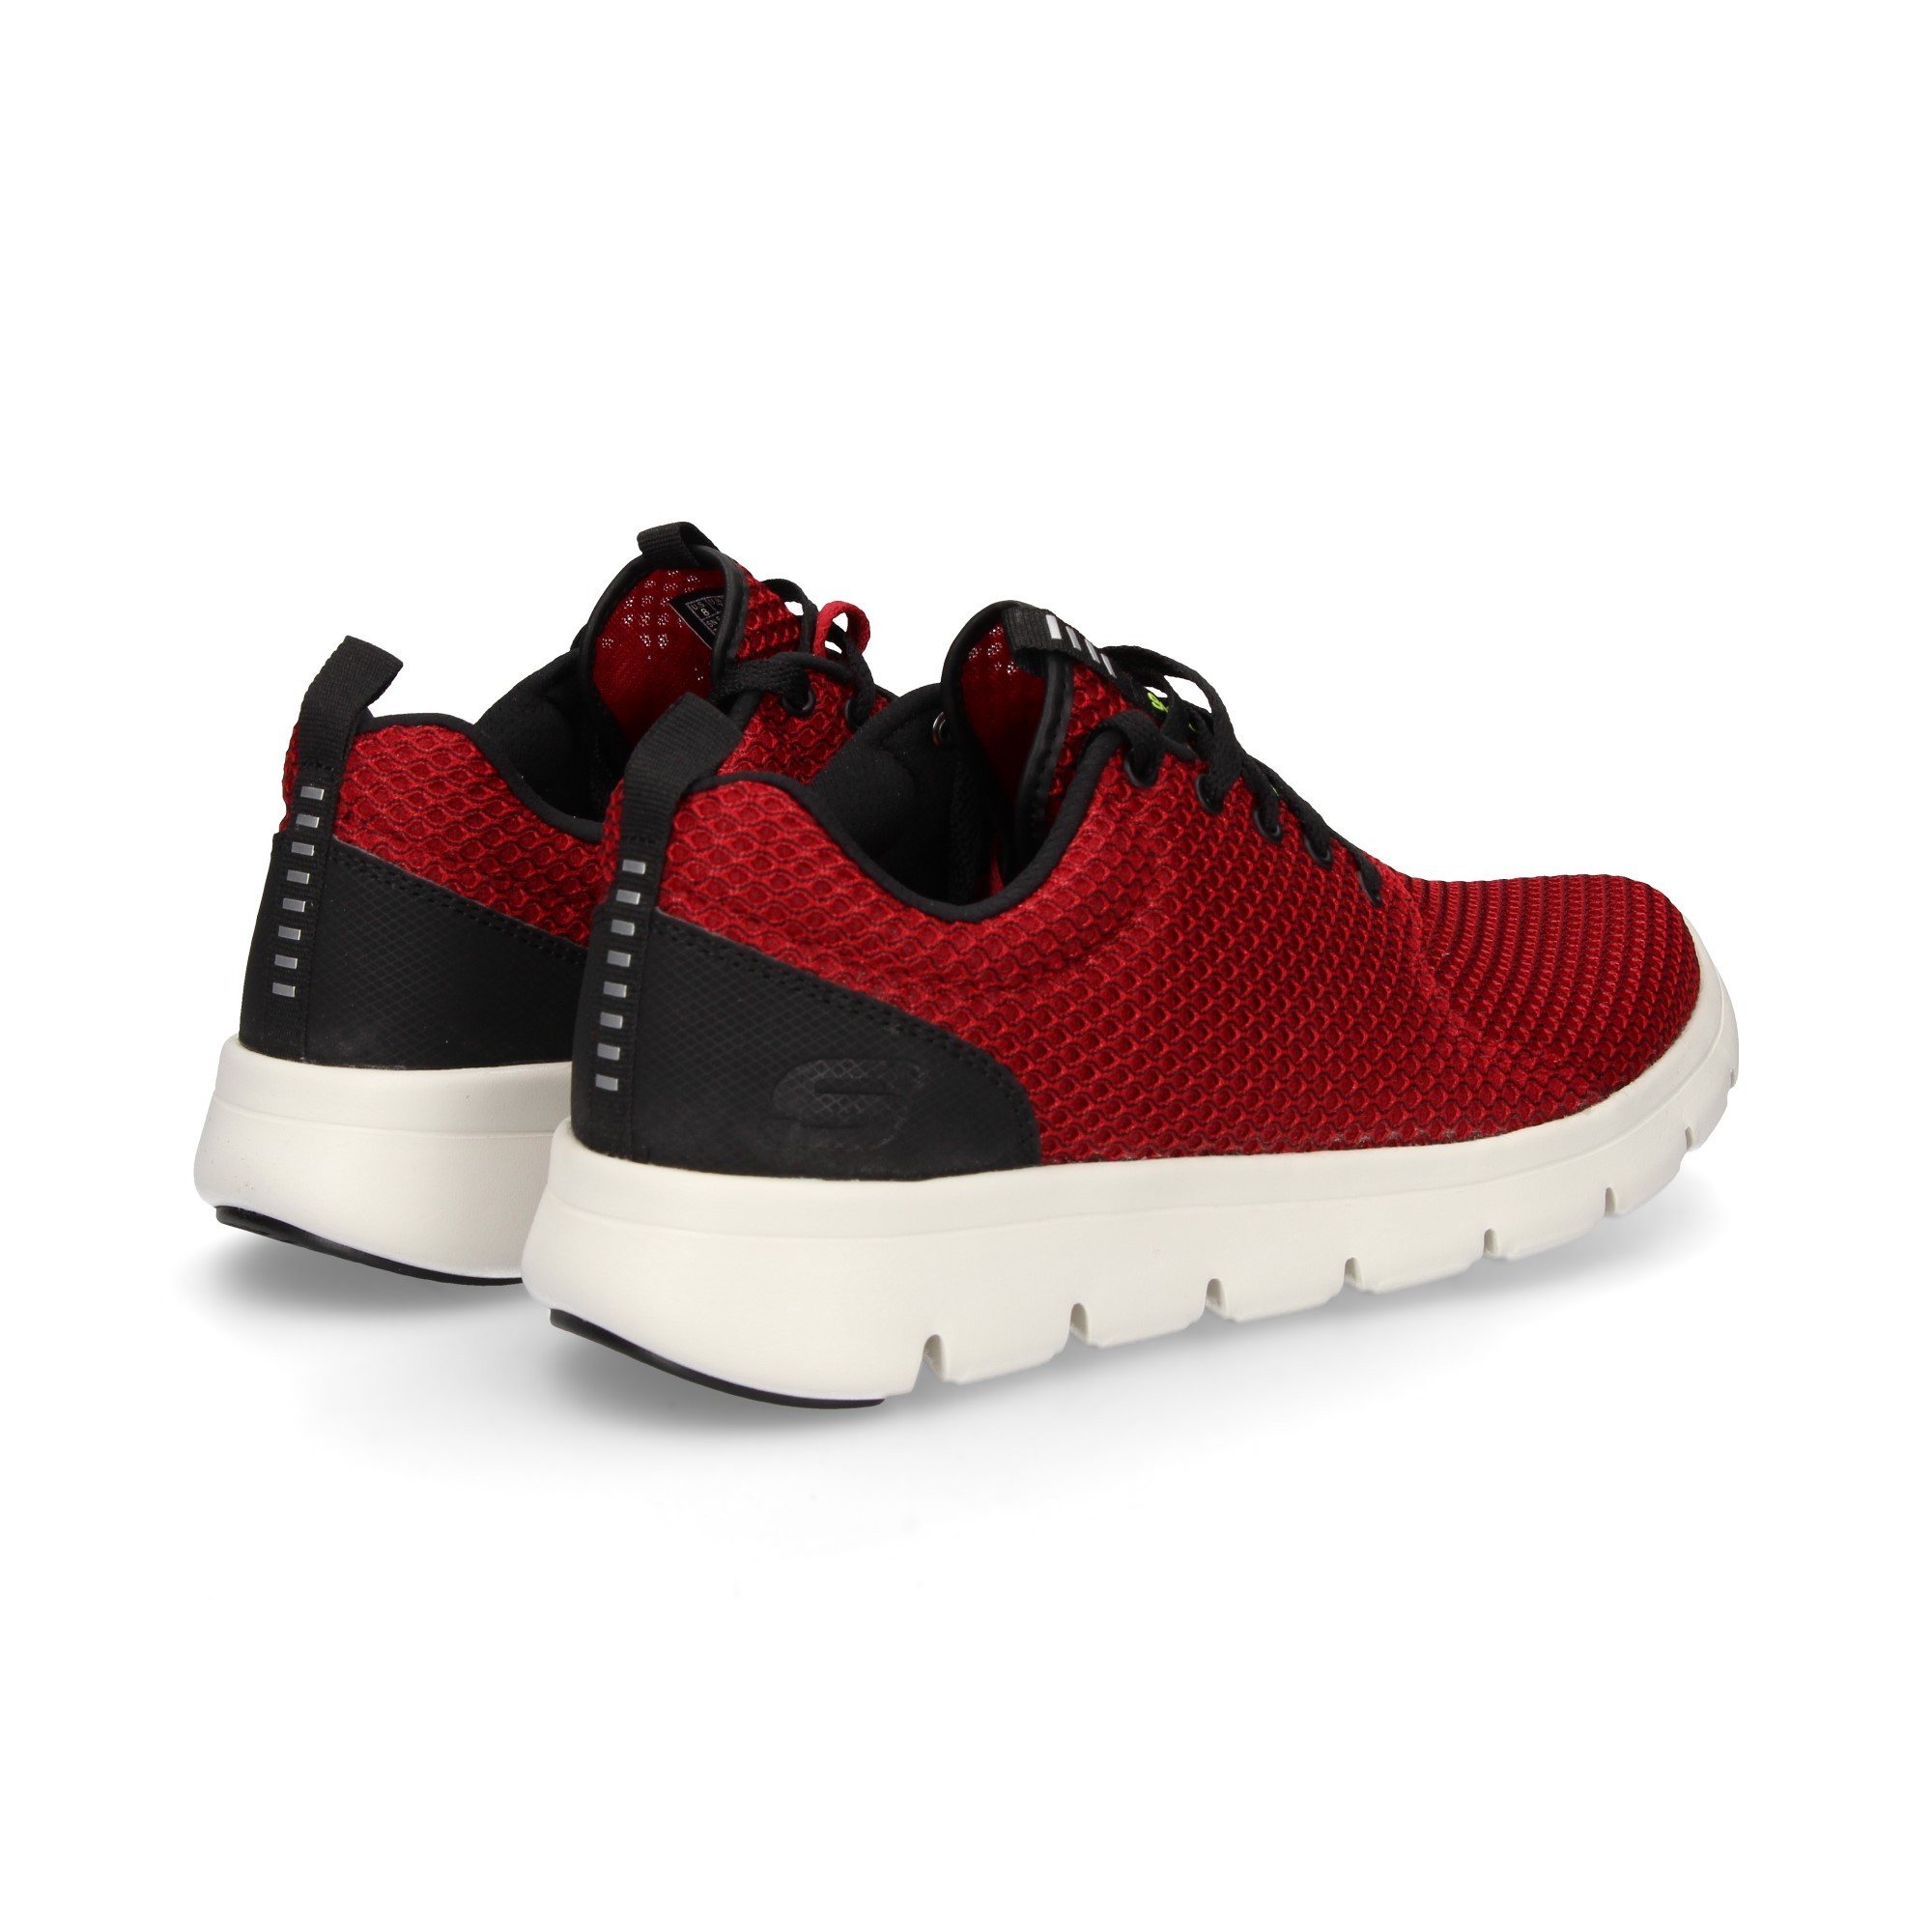 MAILLE ROUGE SPORT